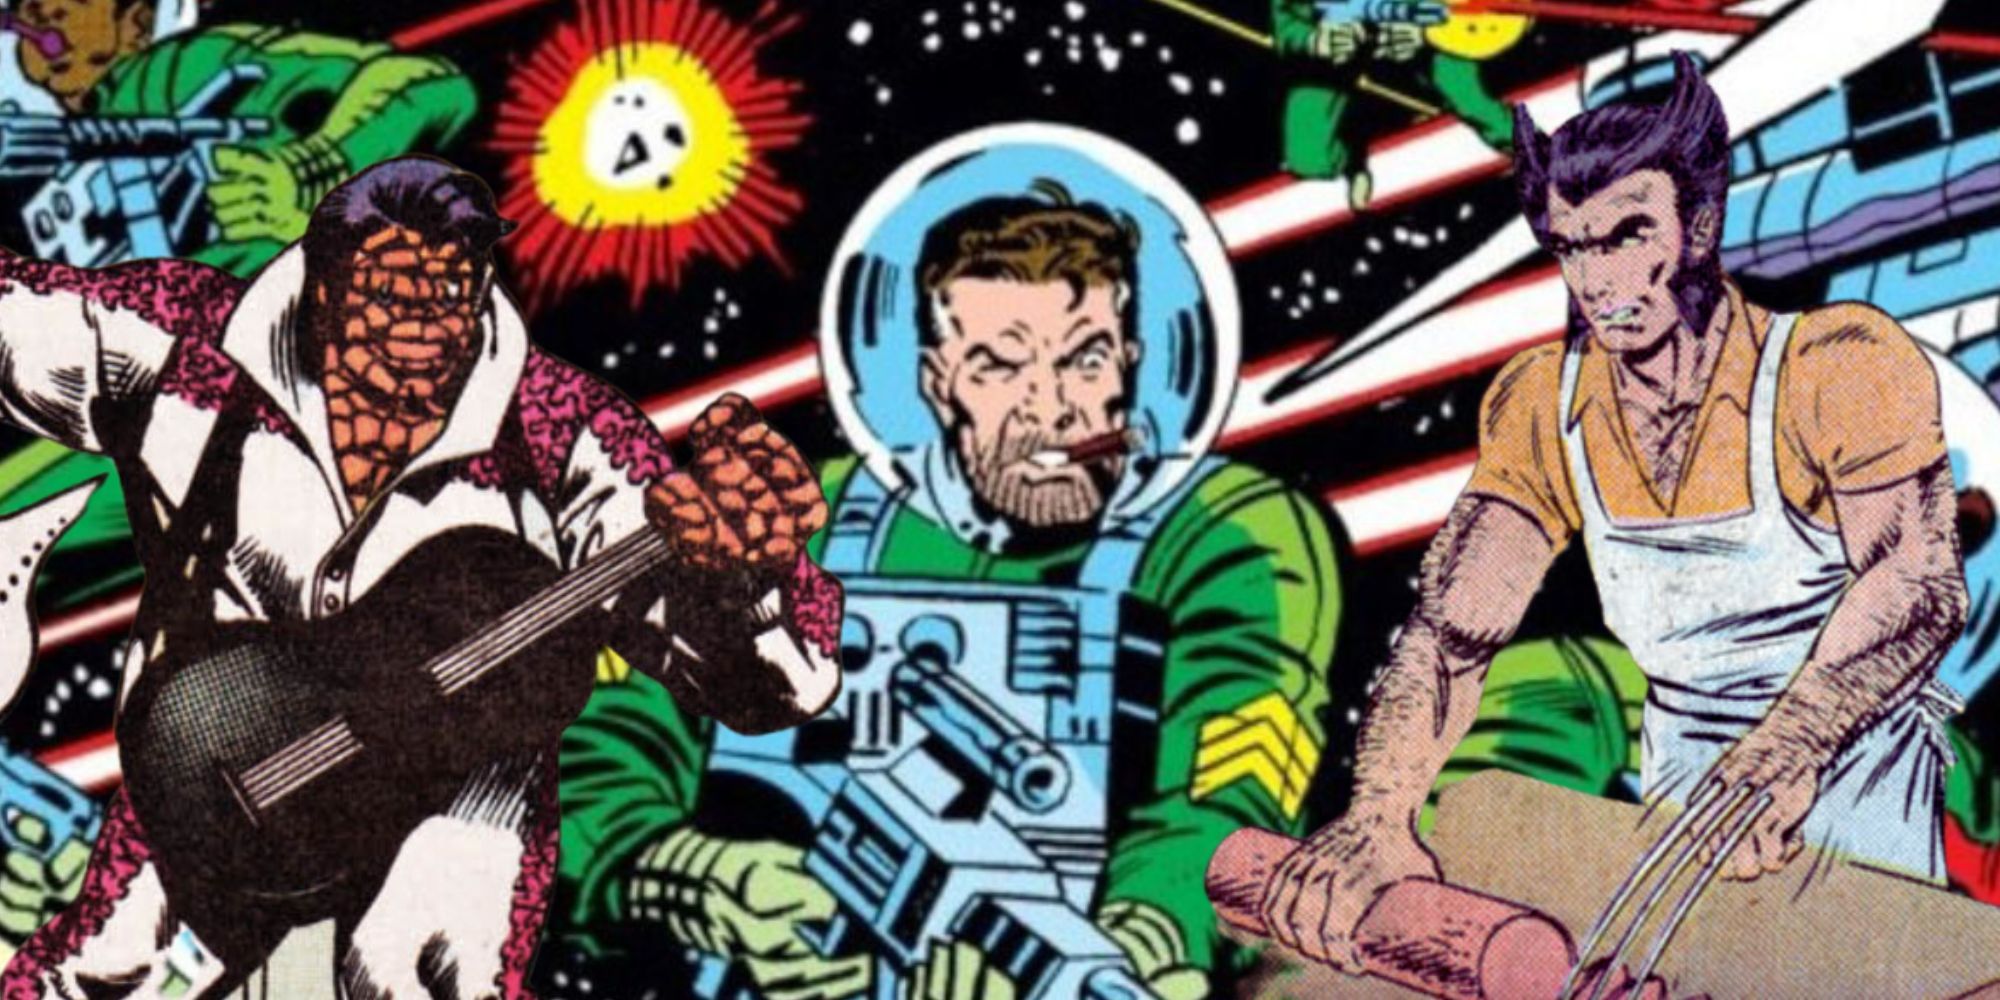 Thing as Elvis, Nick Fury in space and Wolverine as a chef in What If Marvel Comics